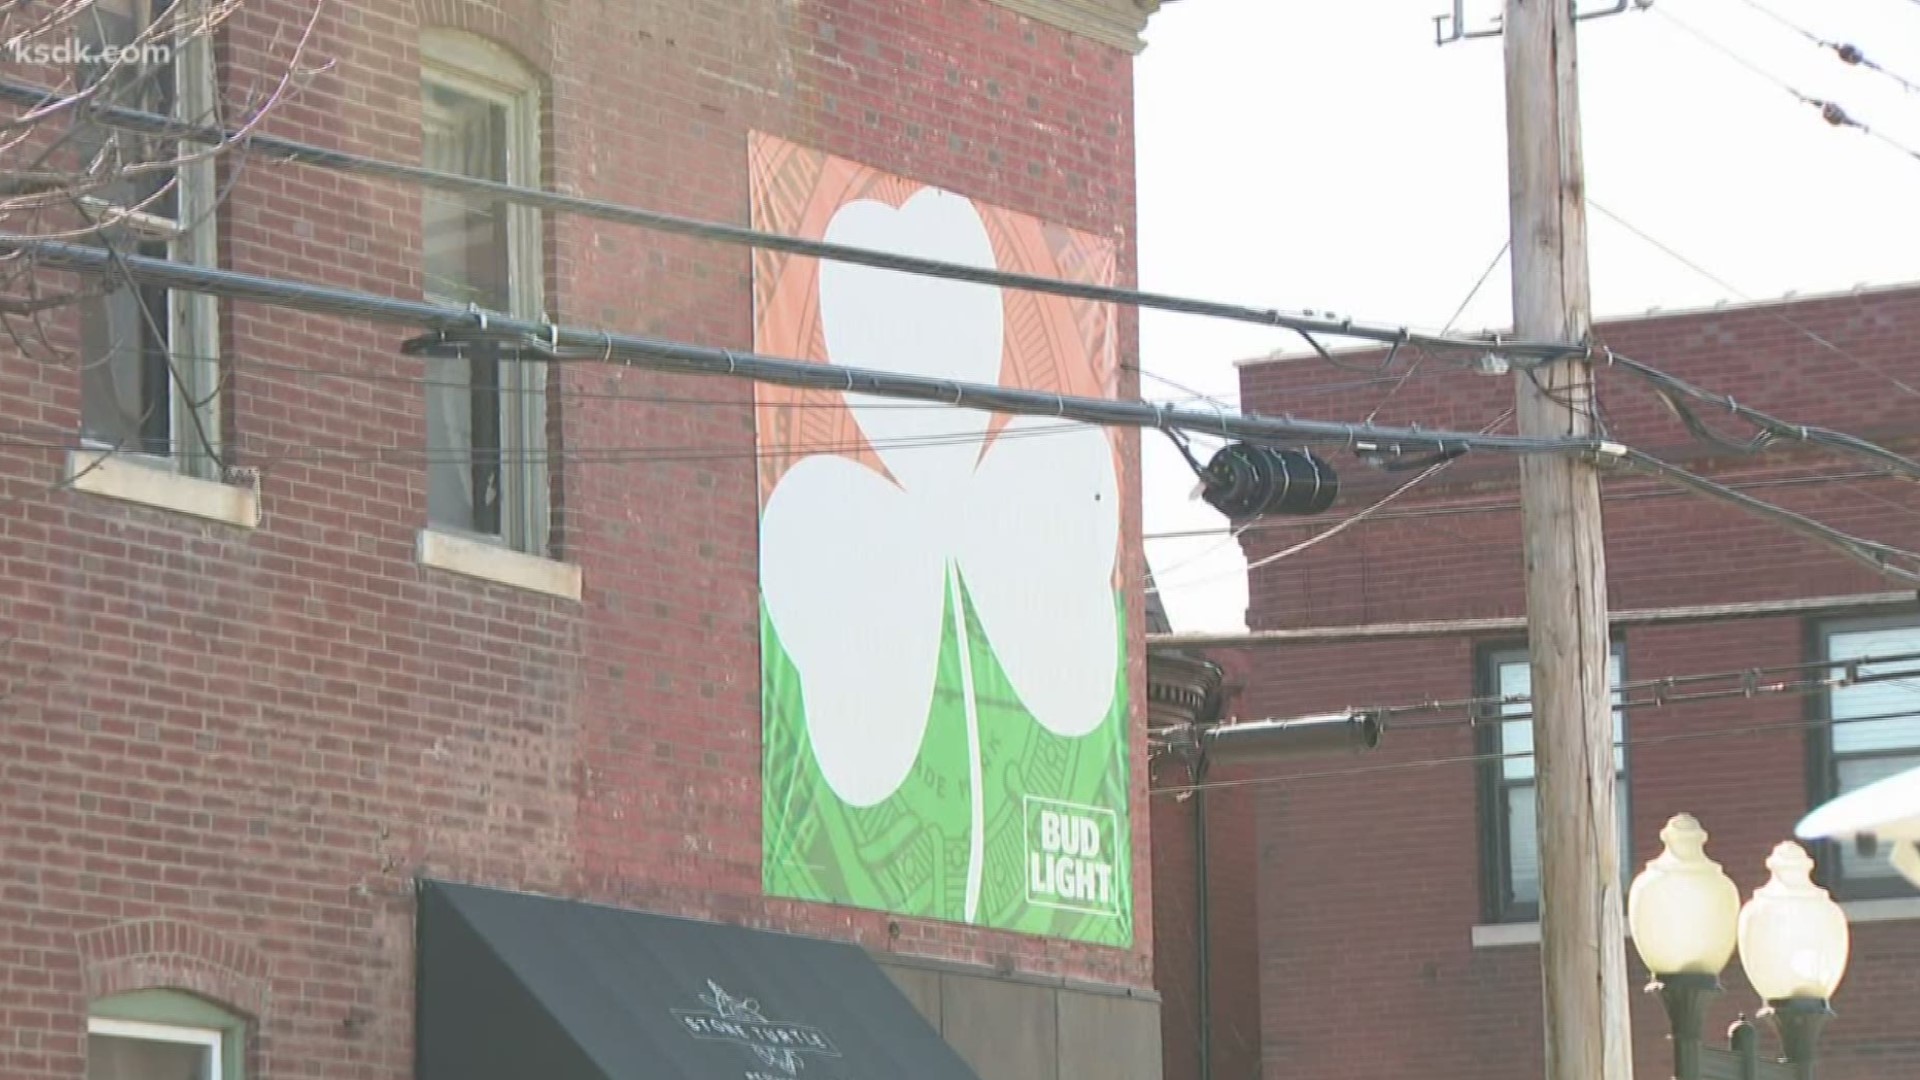 St. Patrick's Day is huge for area businesses, but this year, many of their doors will be closed.